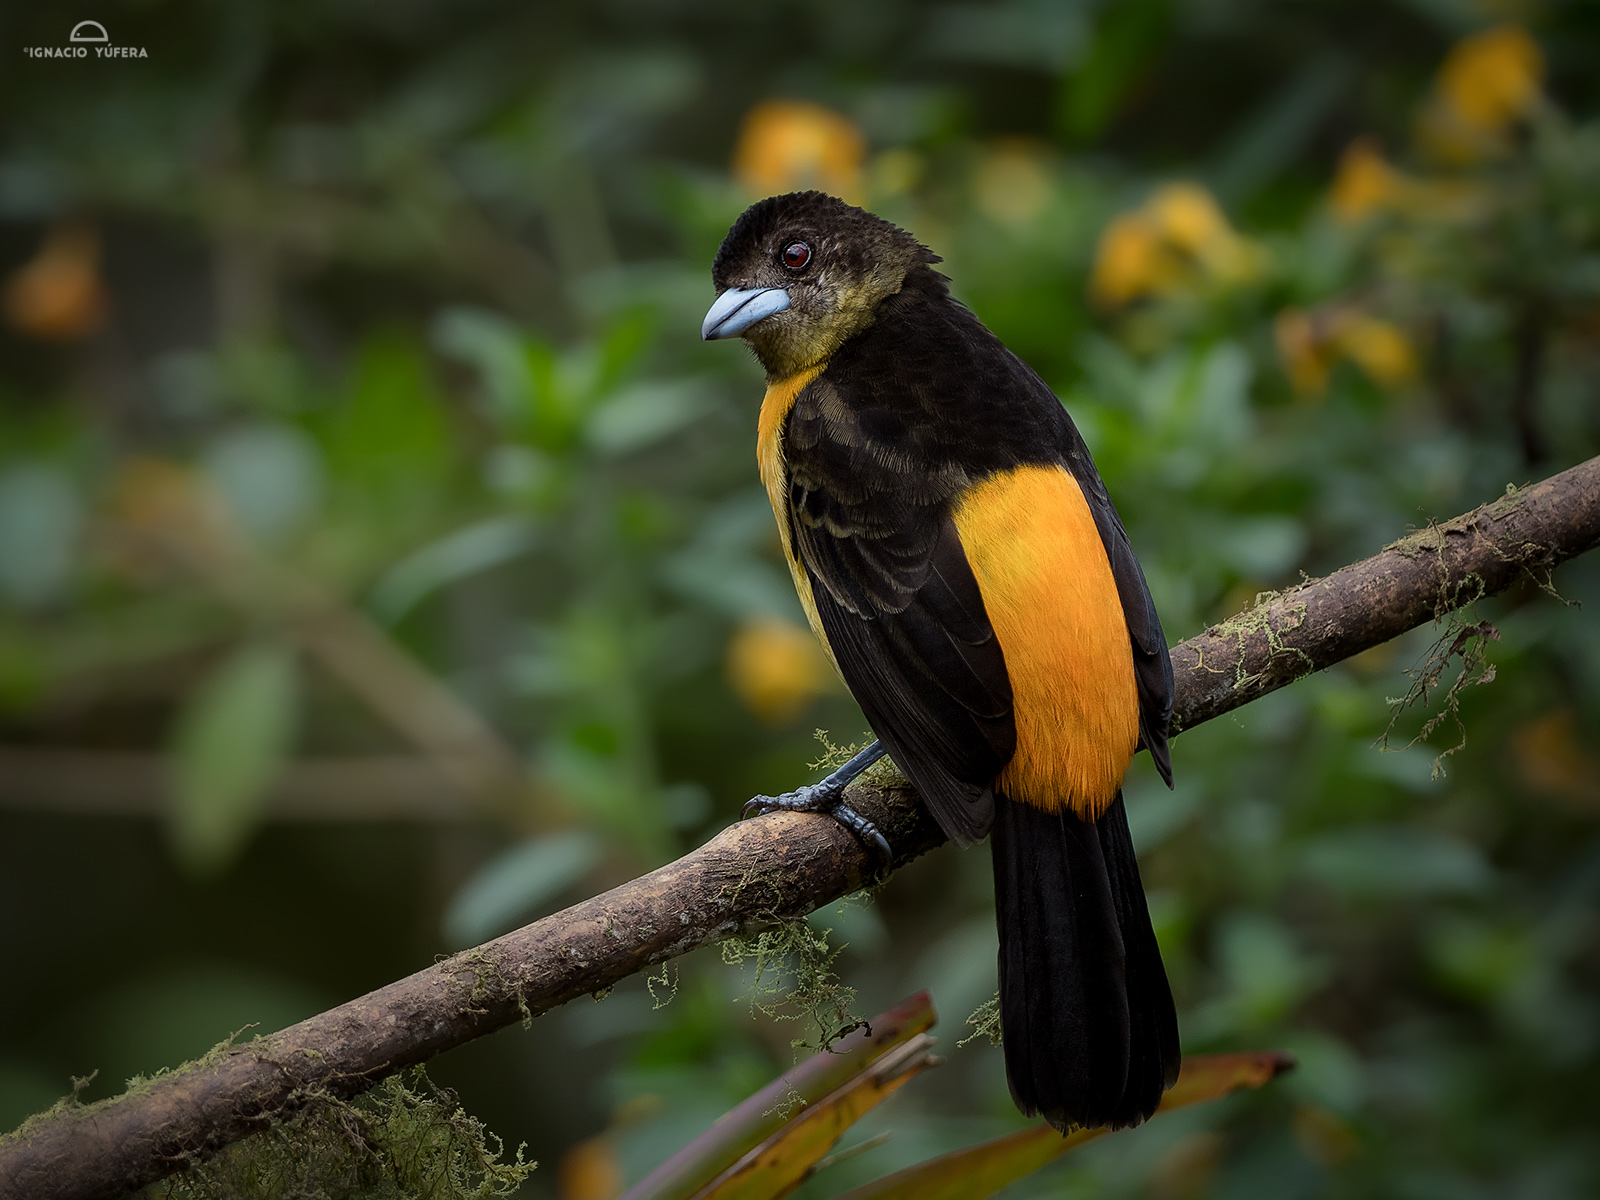 Flame-rumped Tanagers (Ramphocelus flammigerus), female, Cauca Valley, Colombia